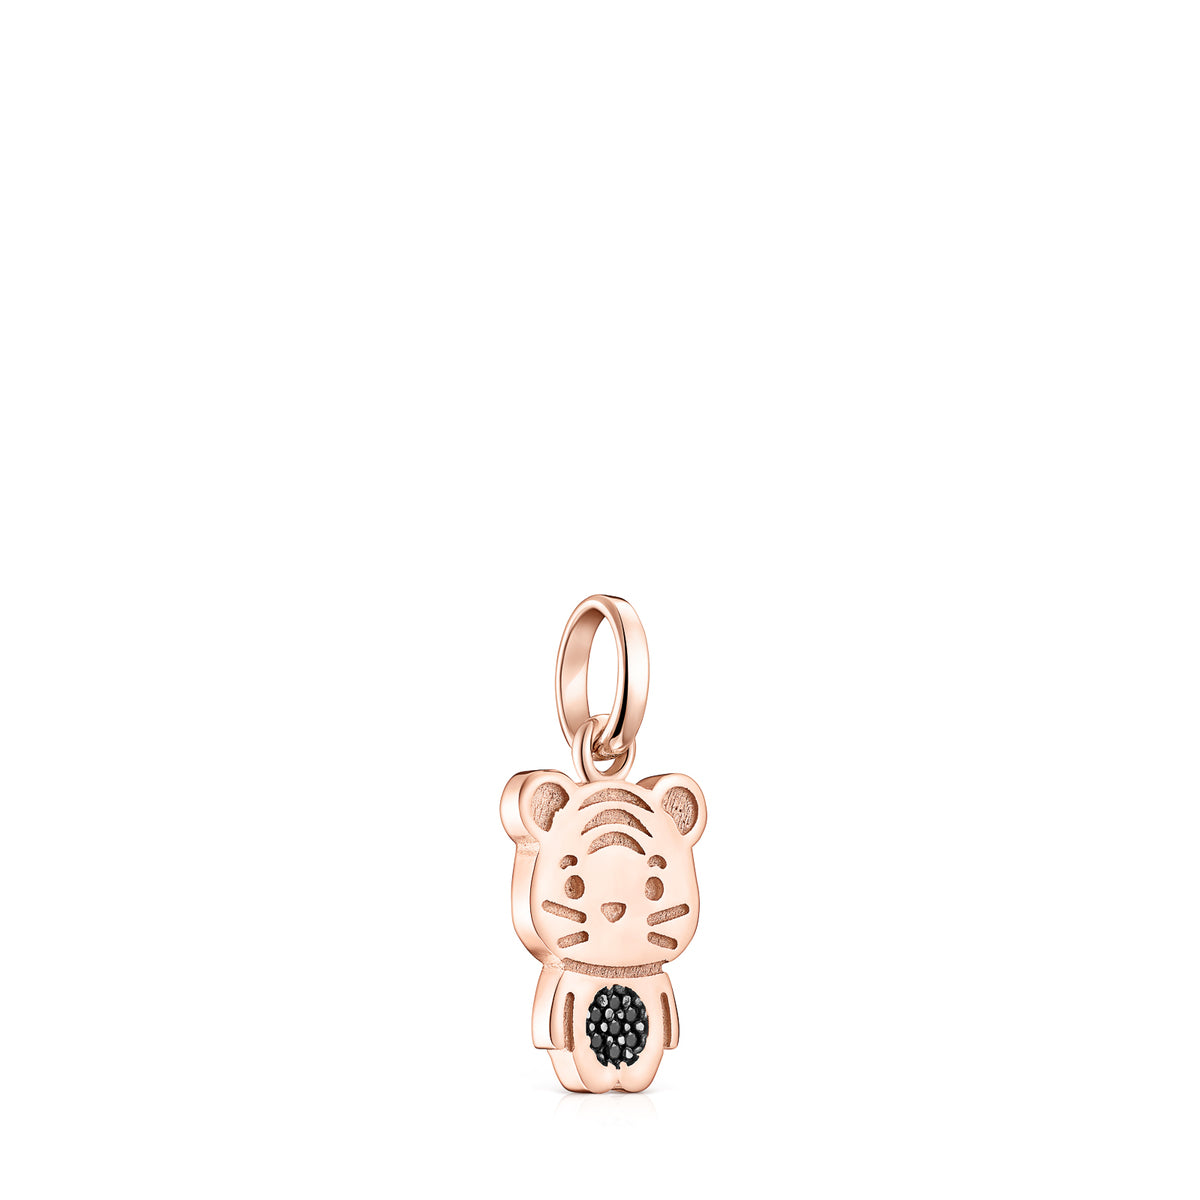 Tous Chinese Horoscope Tiger Pendant in Rose Gold Vermeil with Spinel 918434620